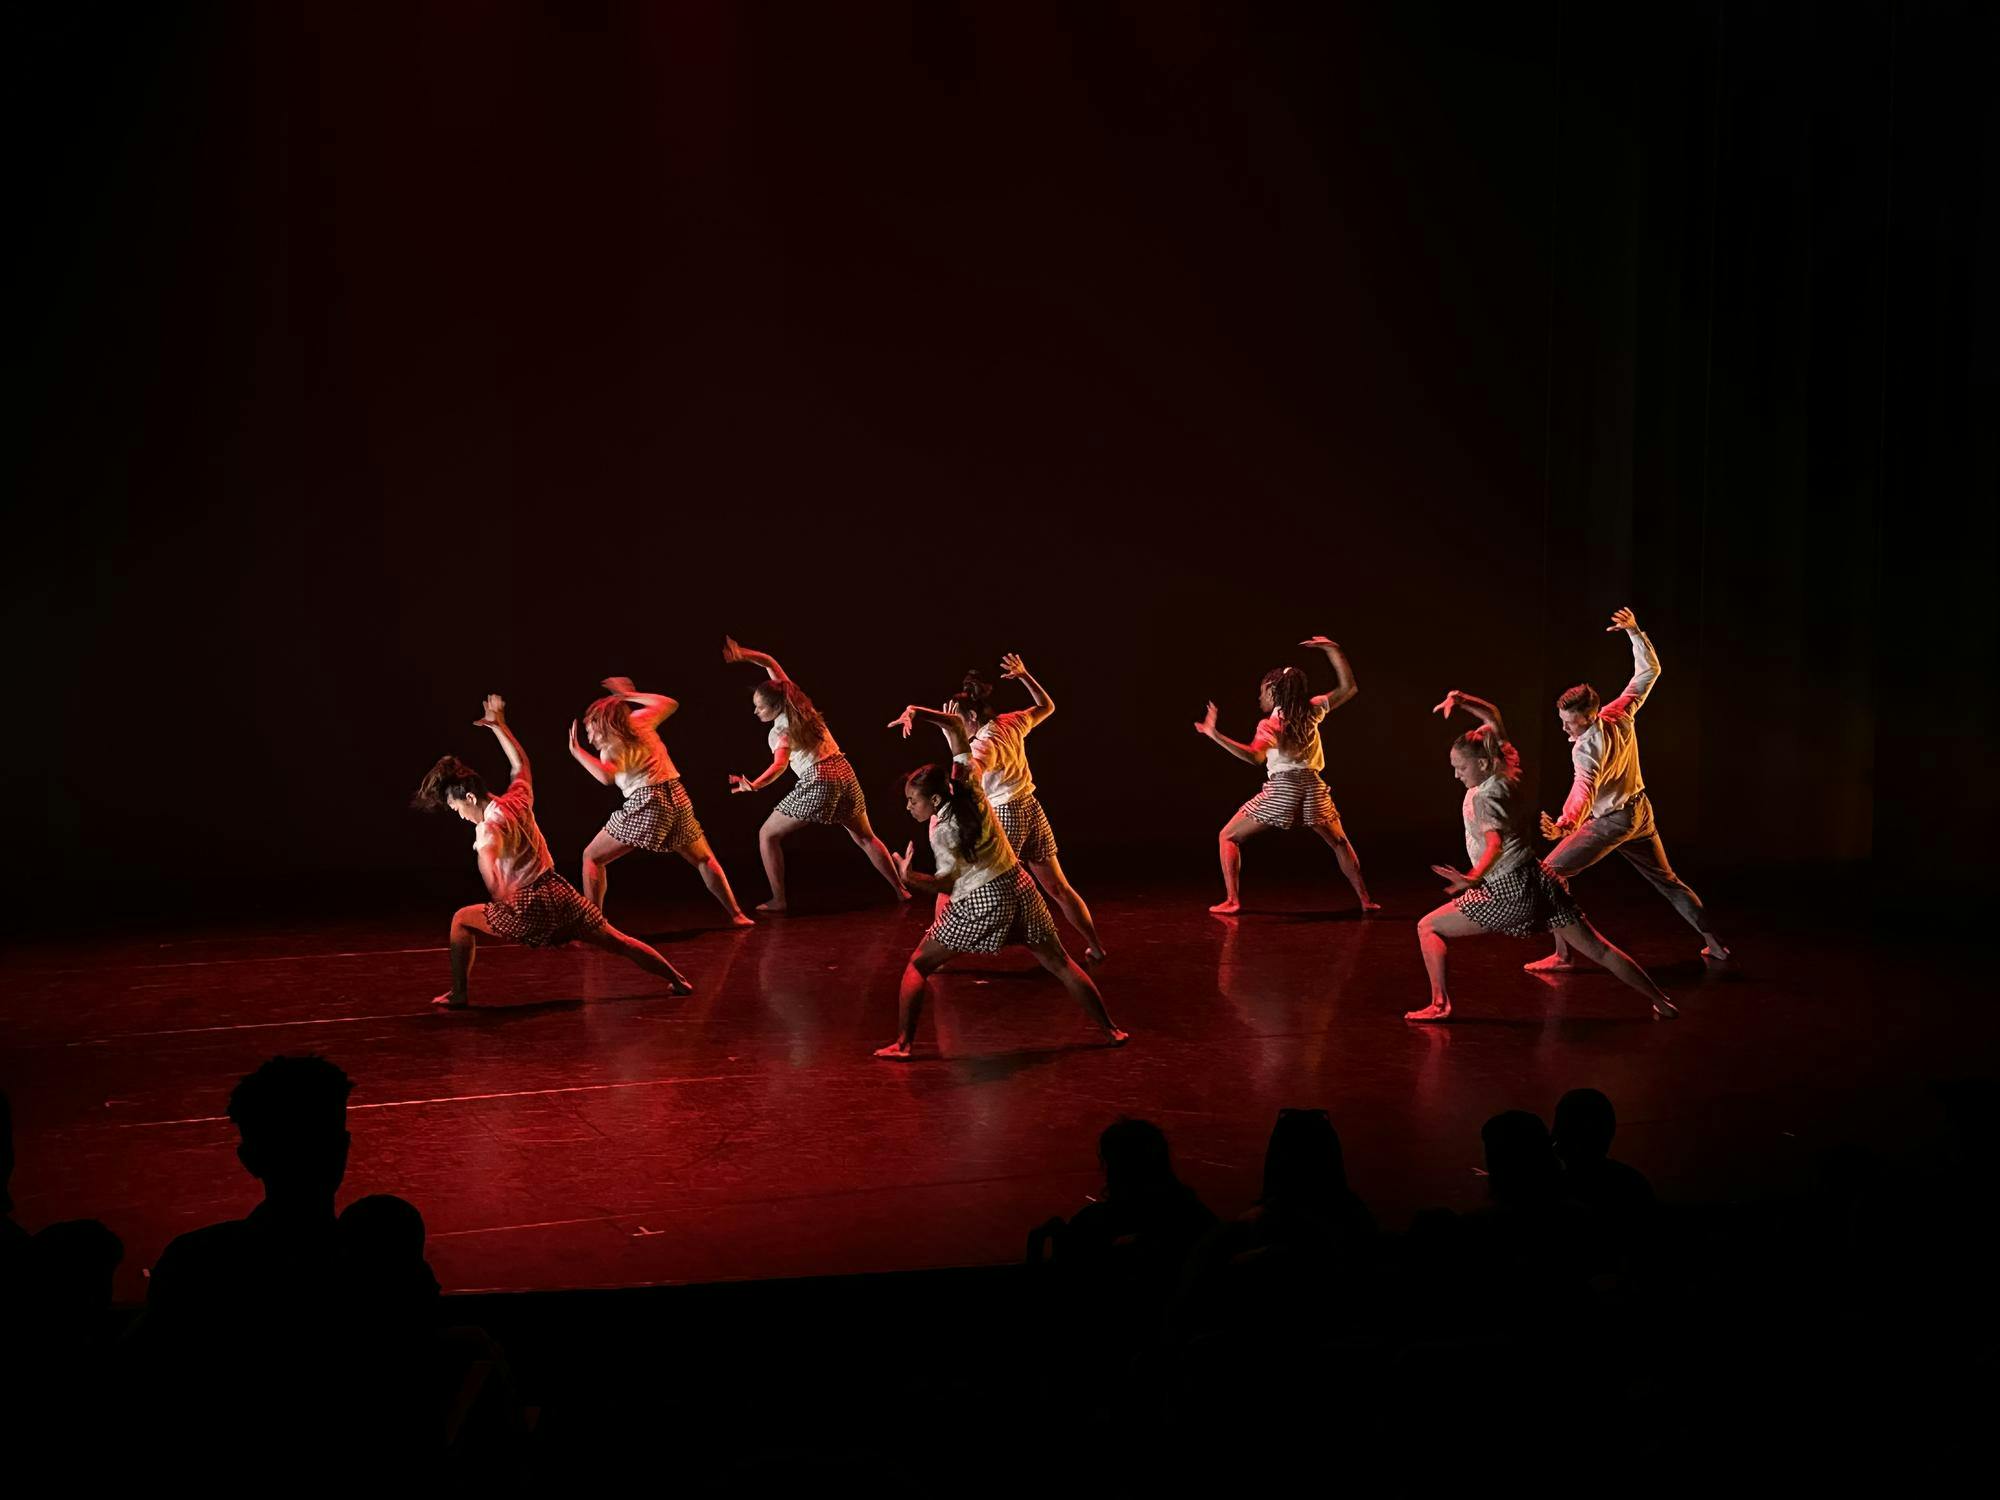 Dancers pose, lunging to the left with their hands in the air, on a black stage illuminated by red lighting.